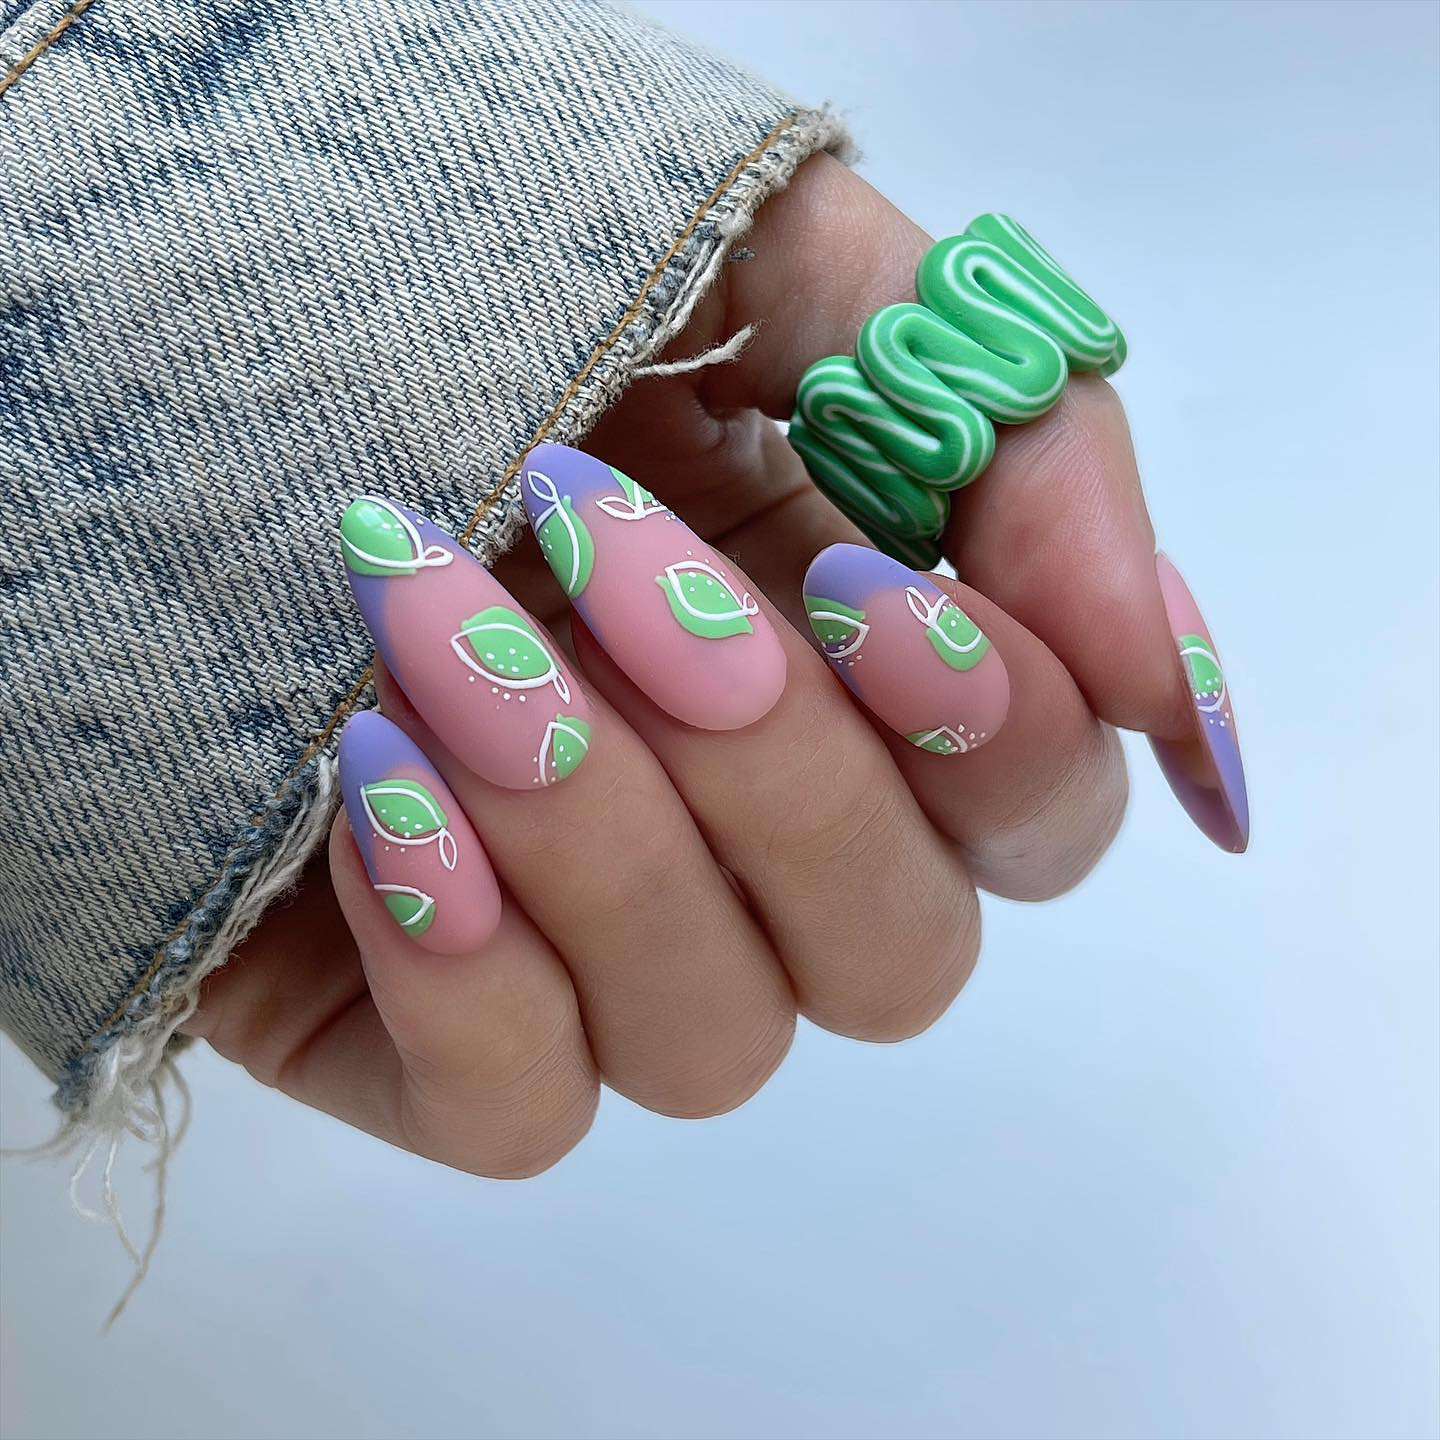 35 Nail Designs For 2022 You’ll Want To Try Immediately images 30